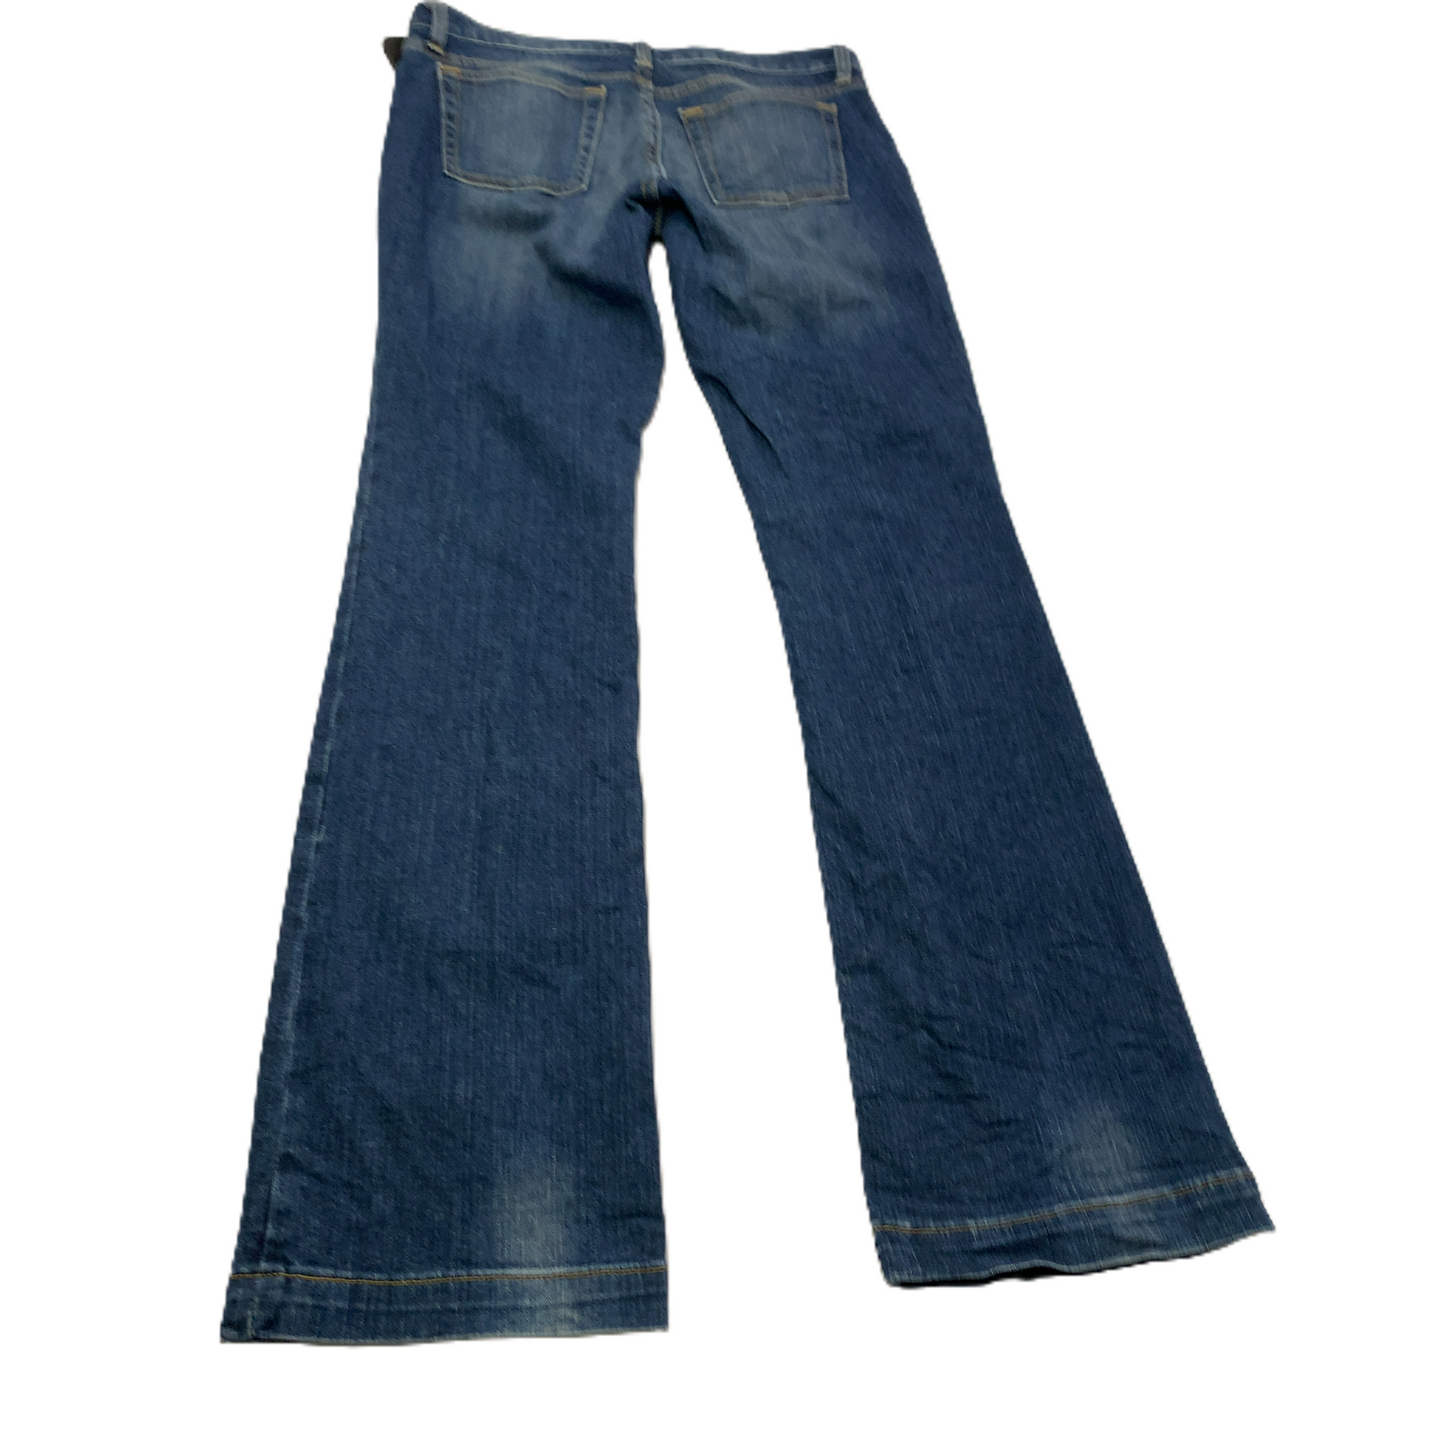 Jeans Boot Cut By Gap  Size: 6long